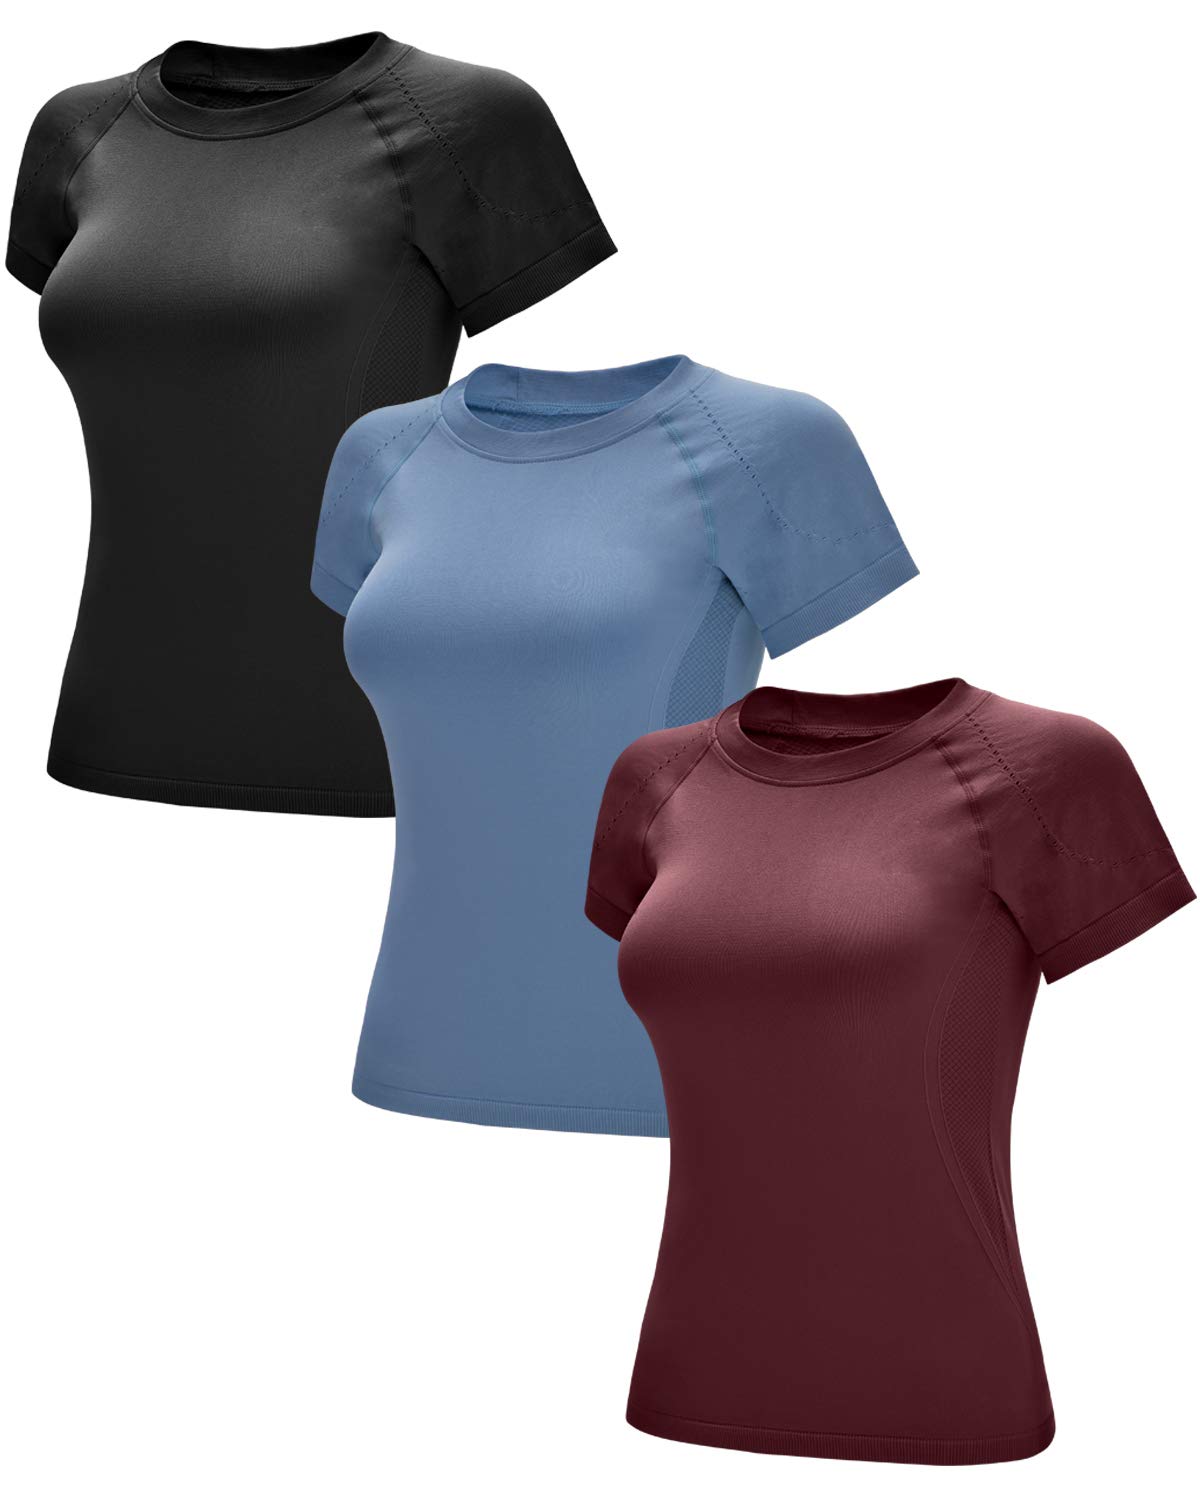 RUNNING GIRL Seamless Workout Shirts for Women Dry-Fit Short Sleeve  T-Shirts Crew Neck Stretch Yoga Tops Athletic Shirts 3pack Small